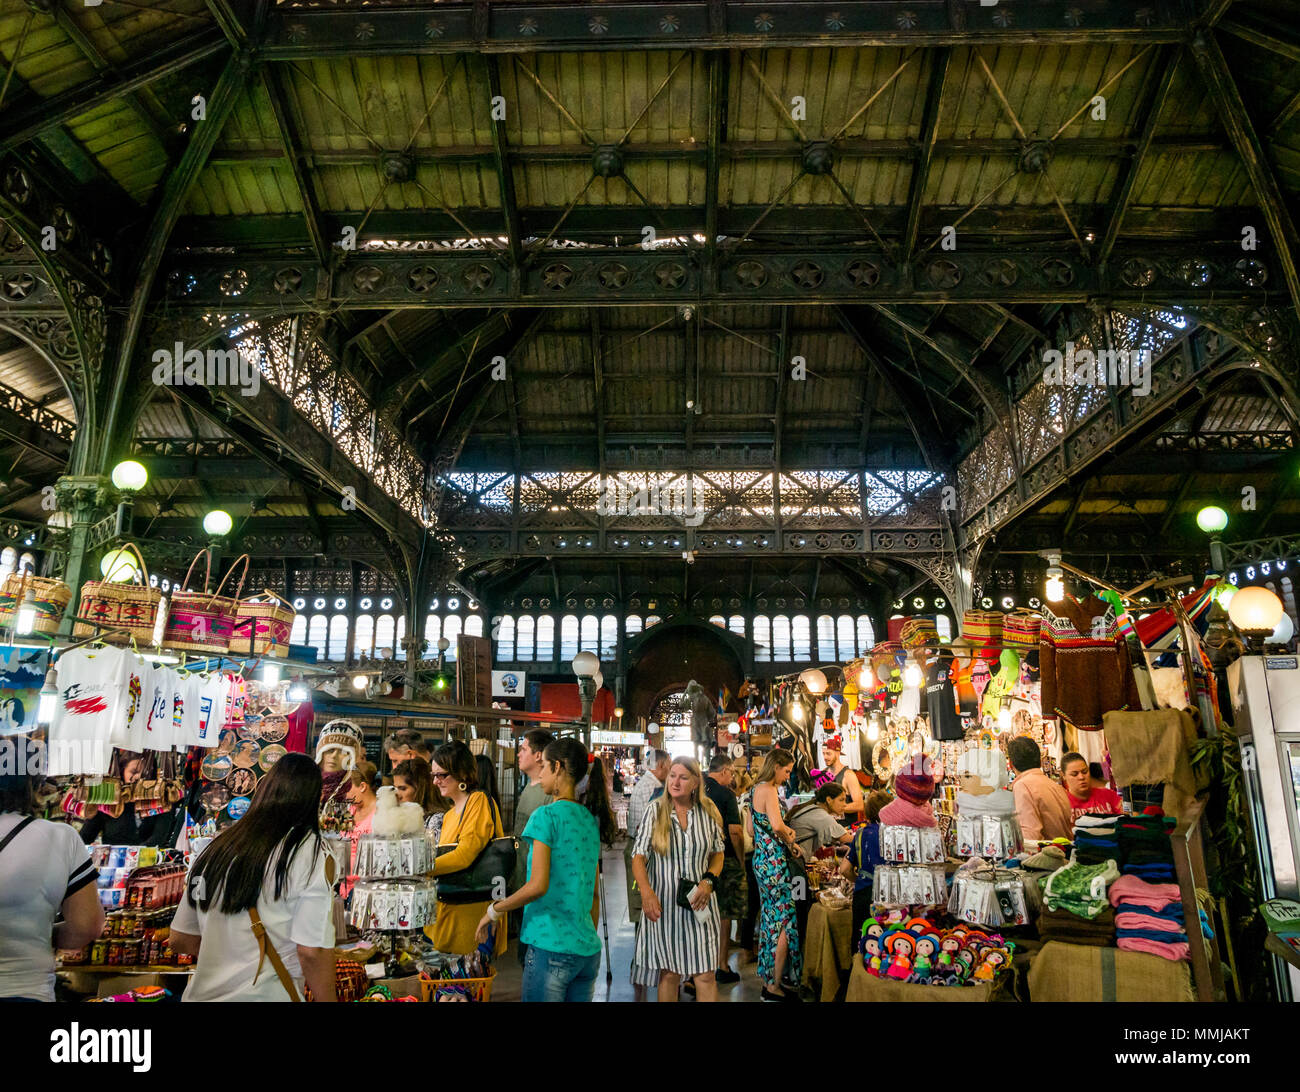 People browsing stalls in historic old Central Market building, Santiago, Chile, with ornate ironwork roof Stock Photo